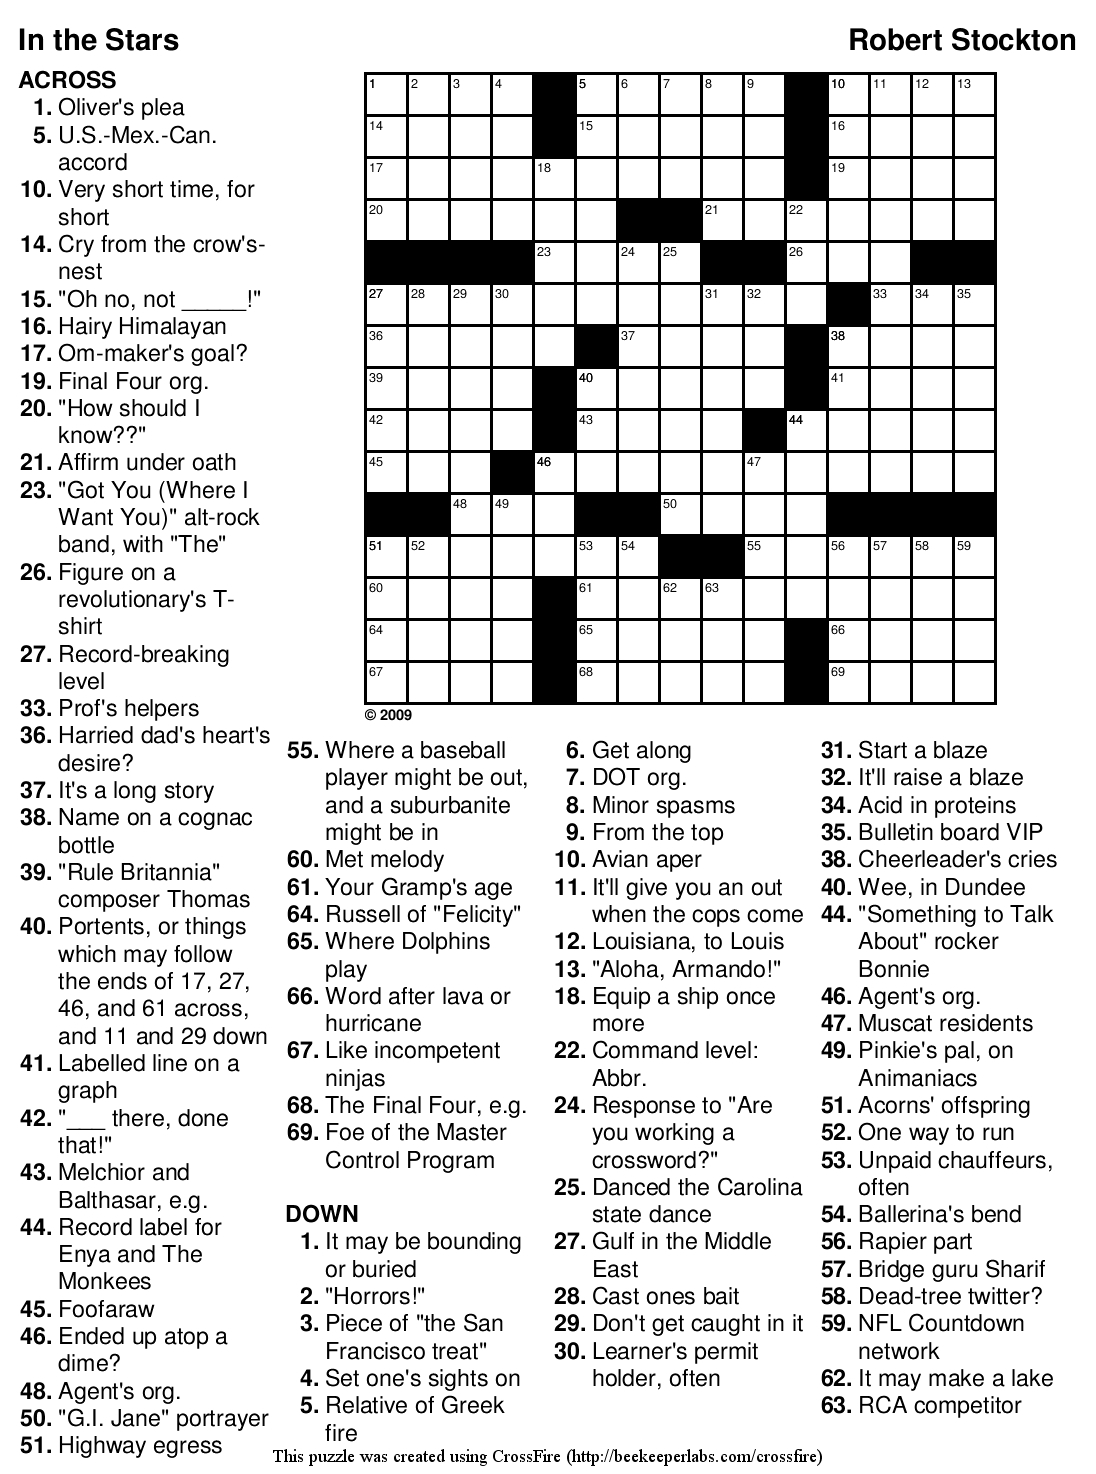 Coloring ~ Coloring Free Large Print Crosswords Easy For Seniors - Printable Thomas Joseph Crossword Answers